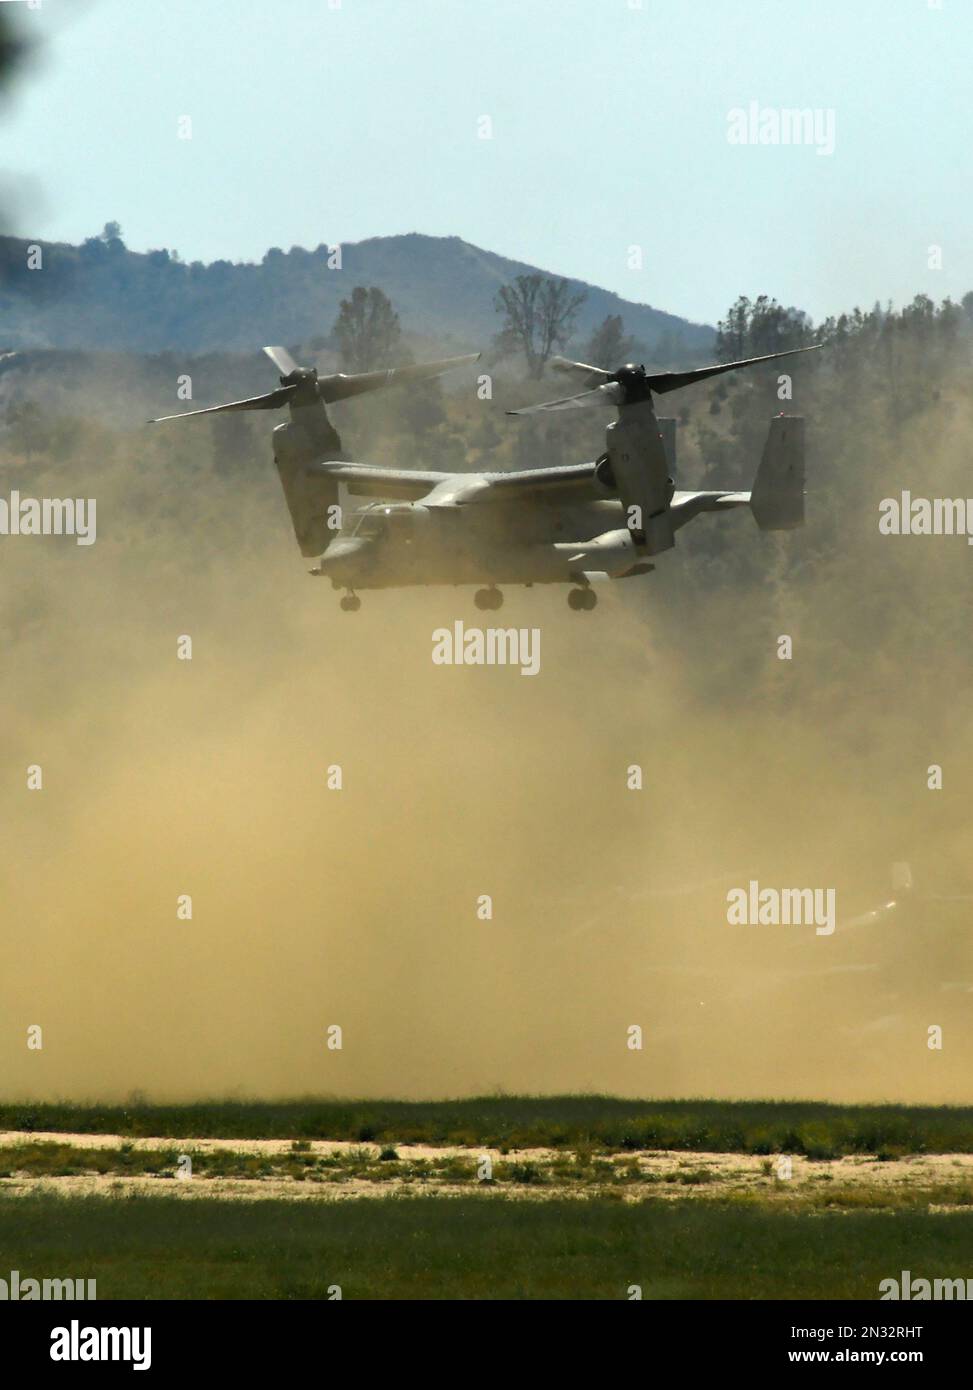 13th Marine Expeditionary Unit conducts training with a variety of helicopters, including MV-22 Osprey on dirt airstrip, Fort Hunter Liggett, CA. Stock Photo